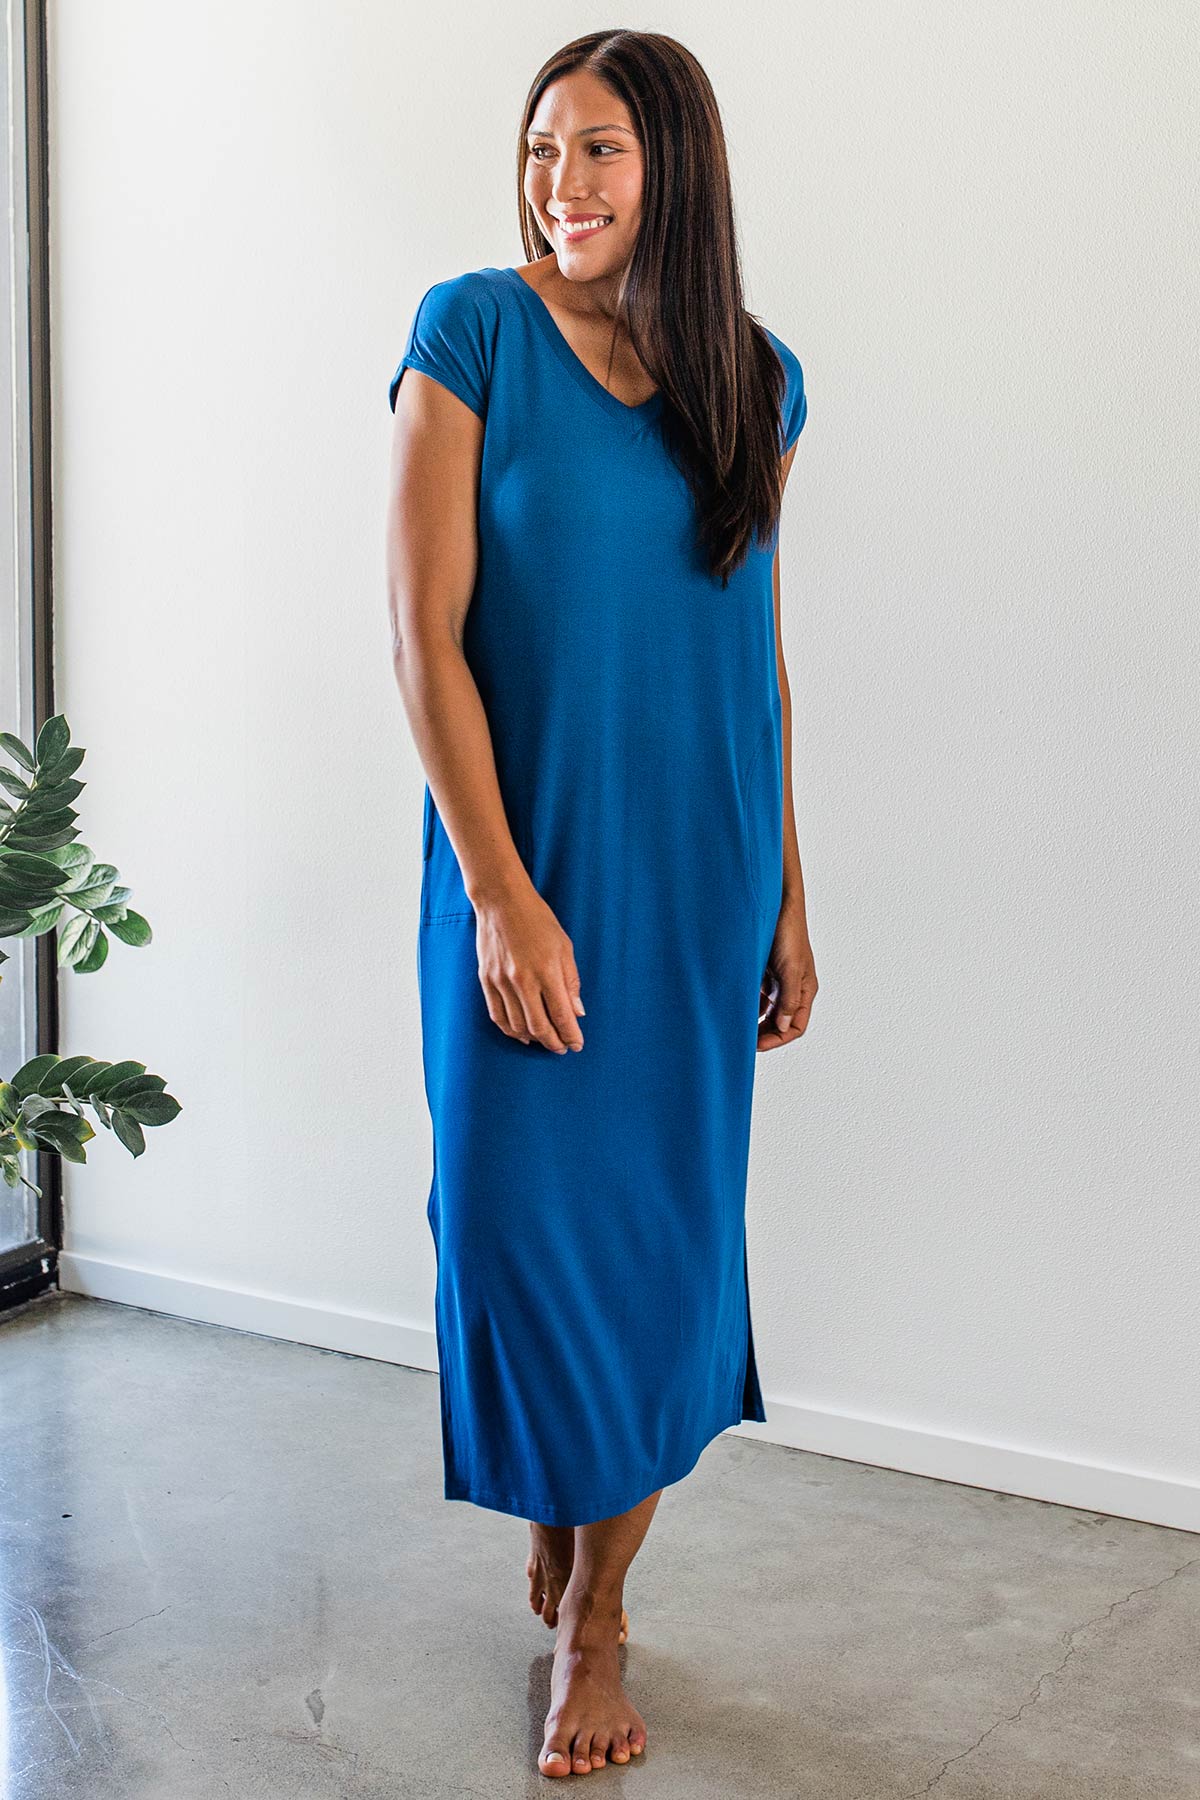 A woman standing and smiling while looking to the side, wearing Yala Sloane V-Neck Cap Sleeve Bamboo Maxi Dress in Lapis